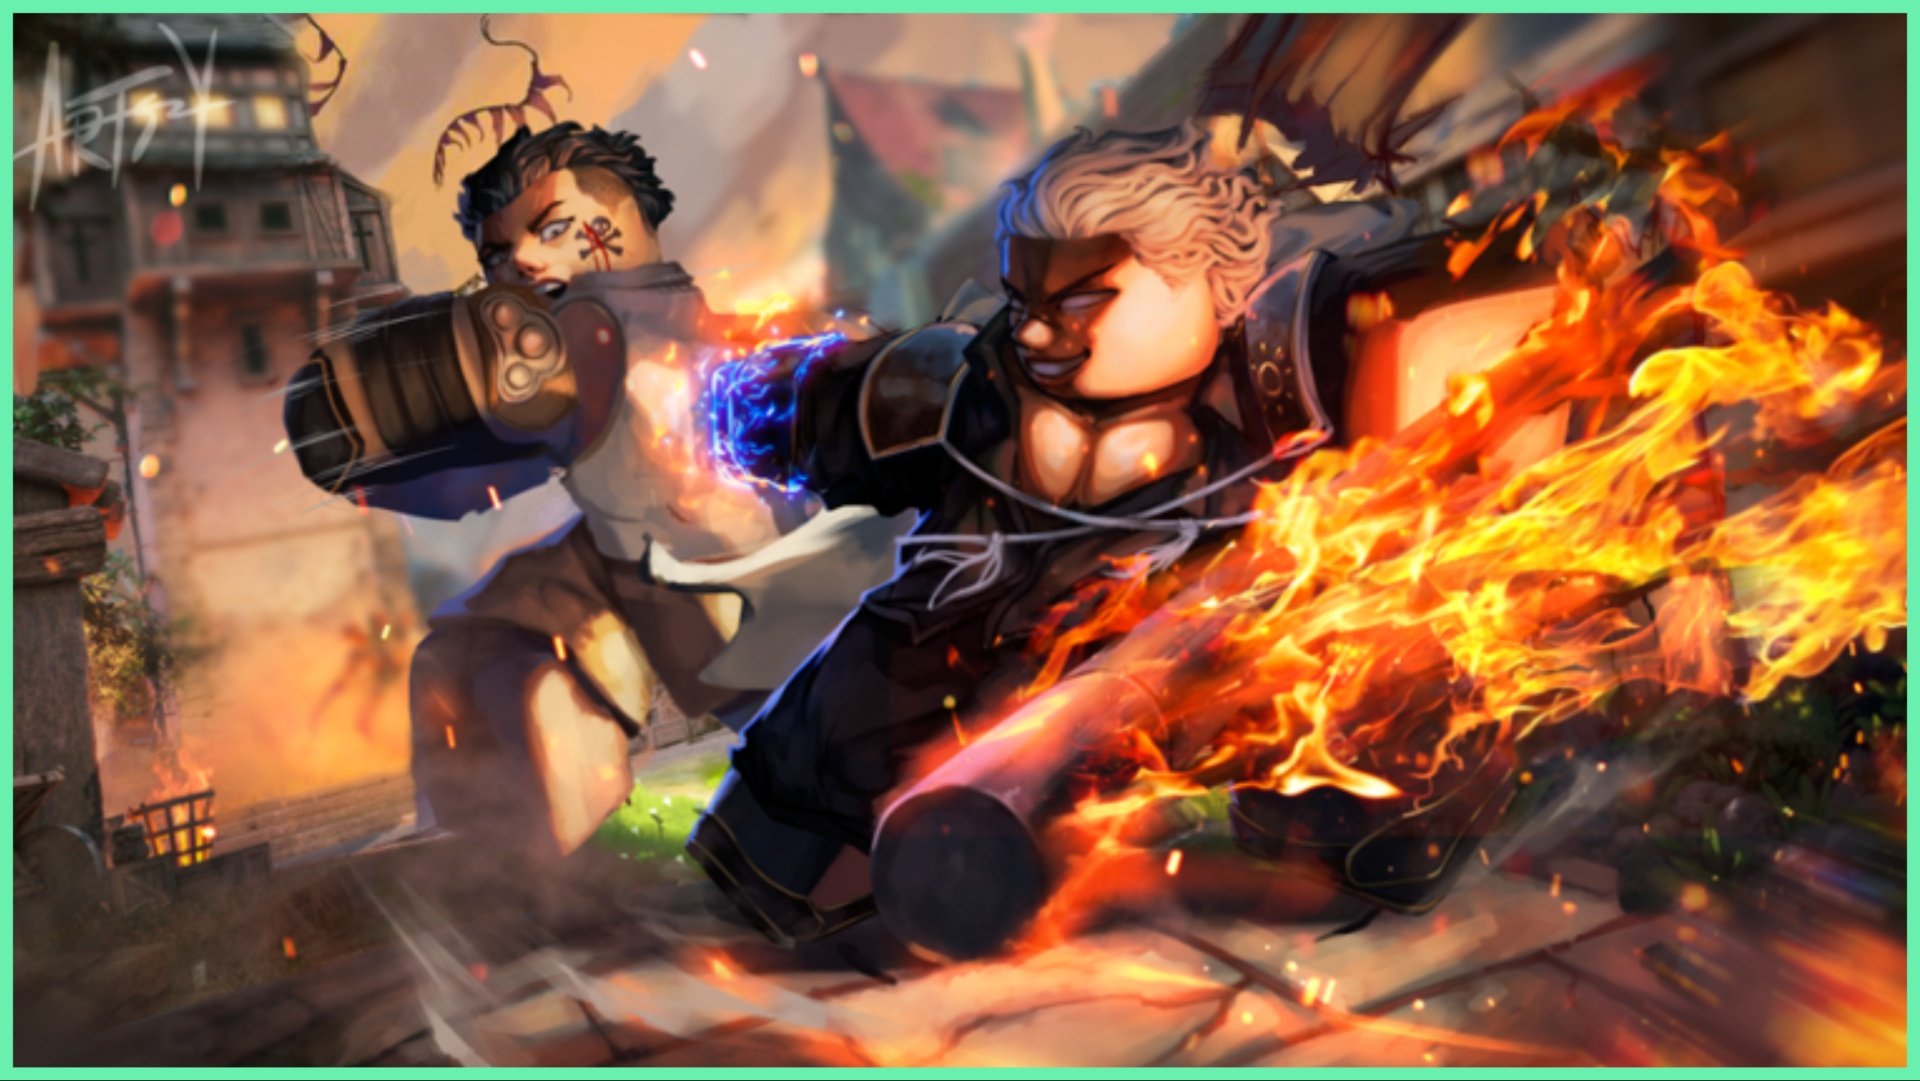 the image shows two characters drawn in the roblox style locked in combat. The one closer to the viewer has a flame like aura around him as he strikes the other player who has a shocked expression and appears to be trying to escape him